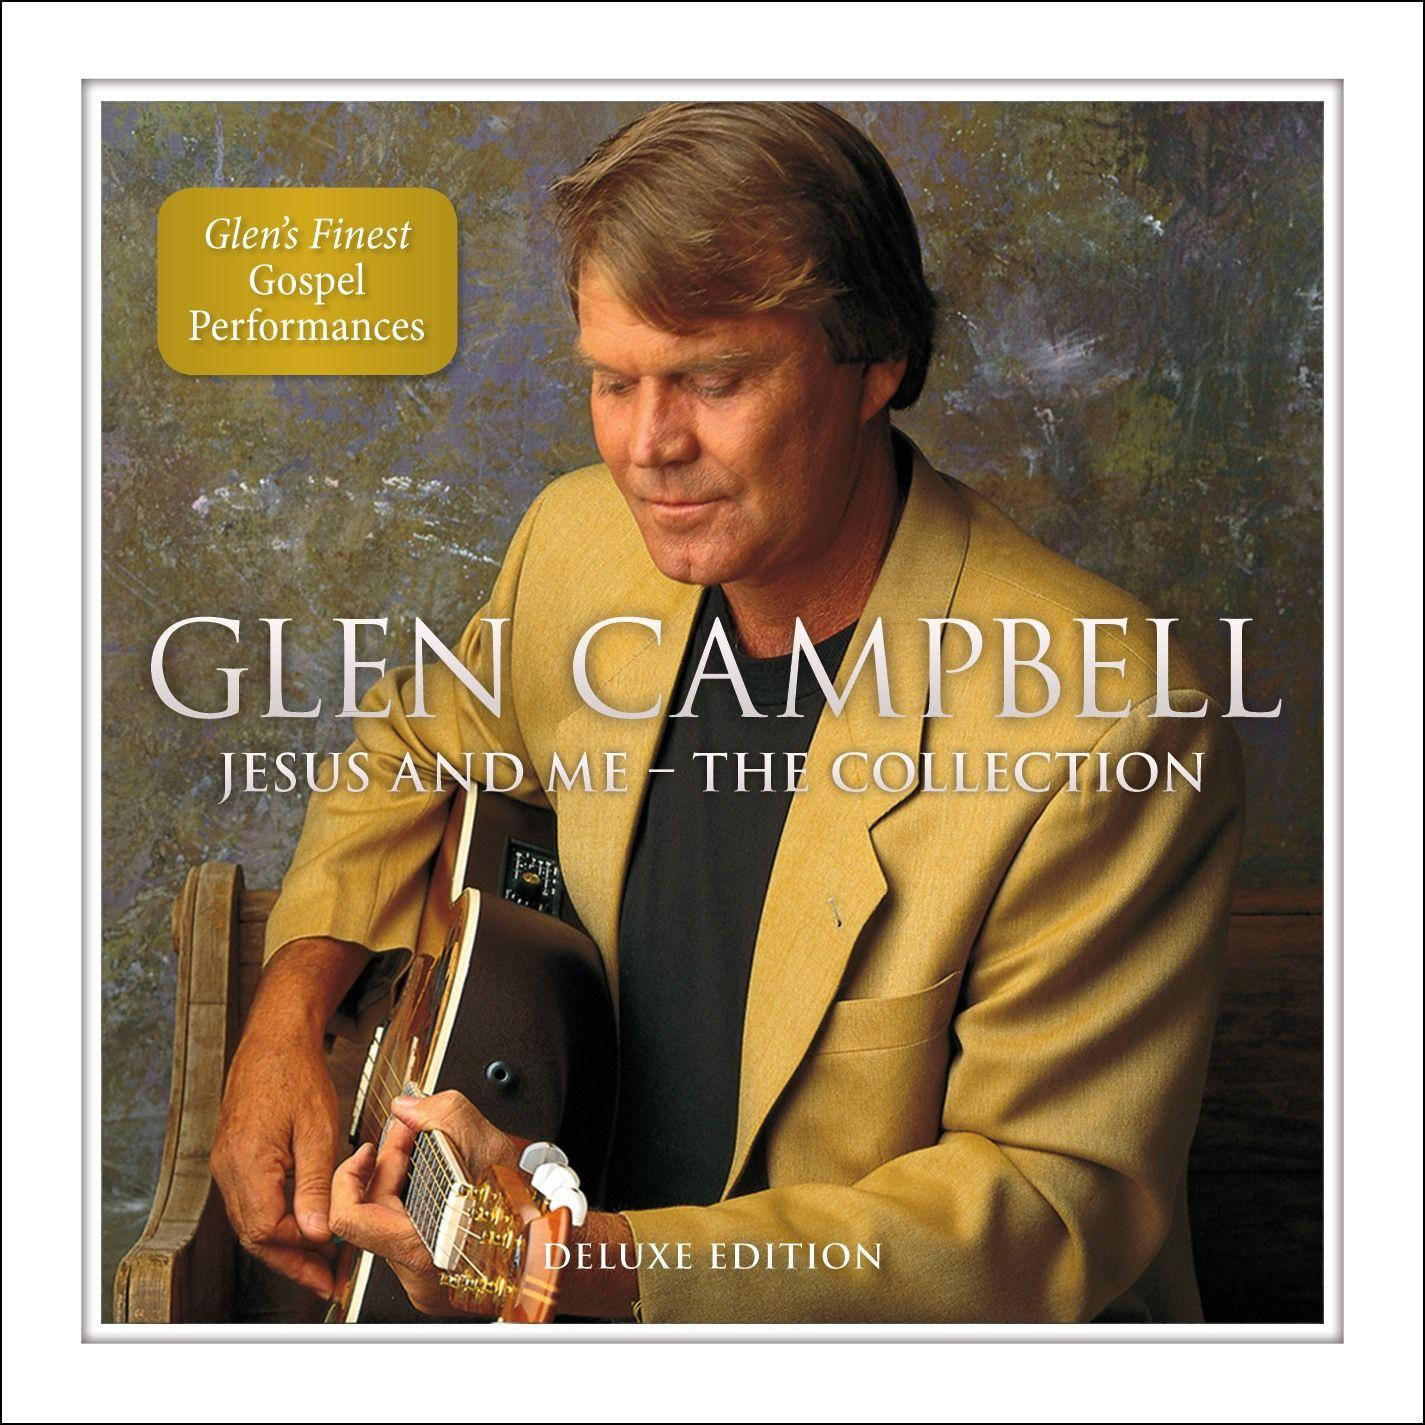 Glen Campbell In His Album Jesus And Me - The Collection Wallpaper